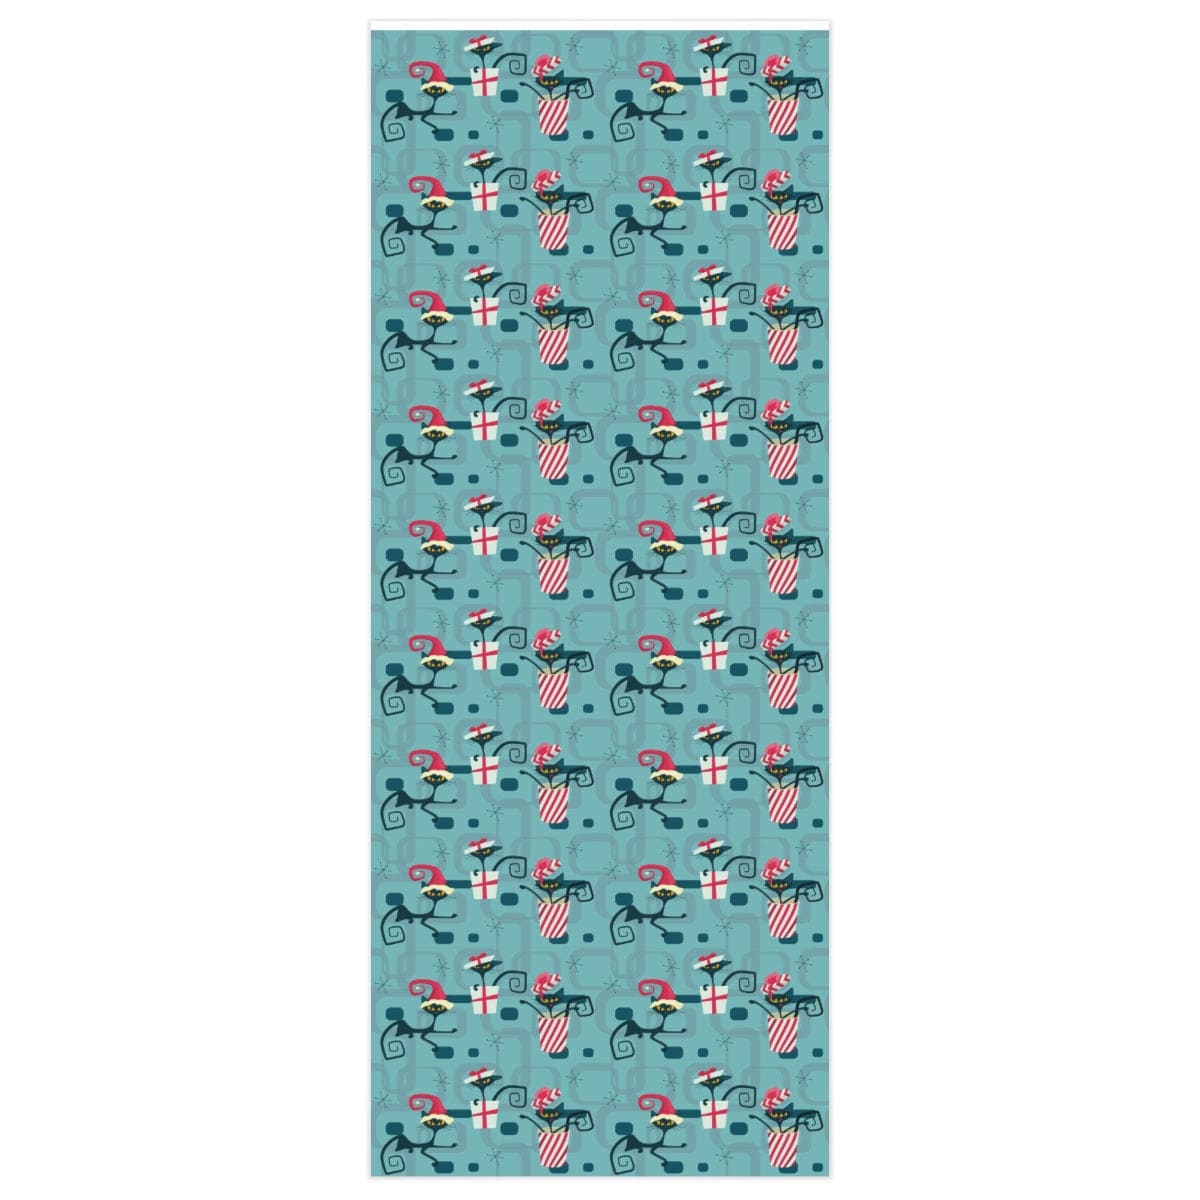 Kate McEnroe New York Atomic Cat Retro Kitschy Wrapping Paper Seasonal &amp; Holiday Decorations 24&quot; × 60&quot; 19523265176692003713